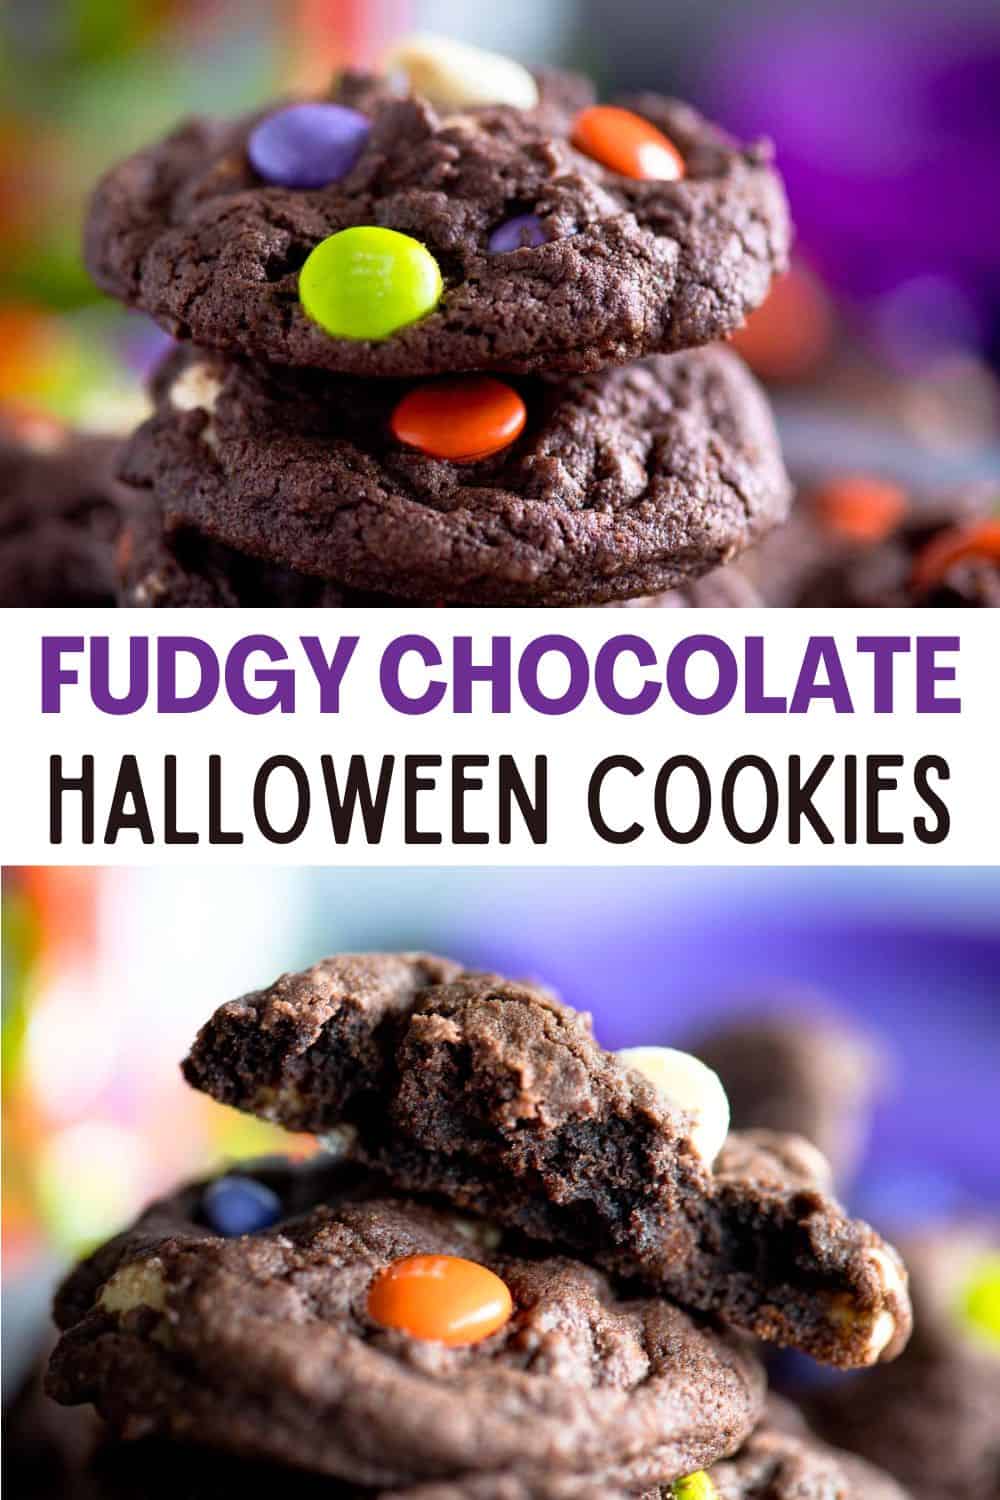 These chewy chocolate Halloween cookies are an easy option to add to your Halloween party table. Ready in just 20 minutes!